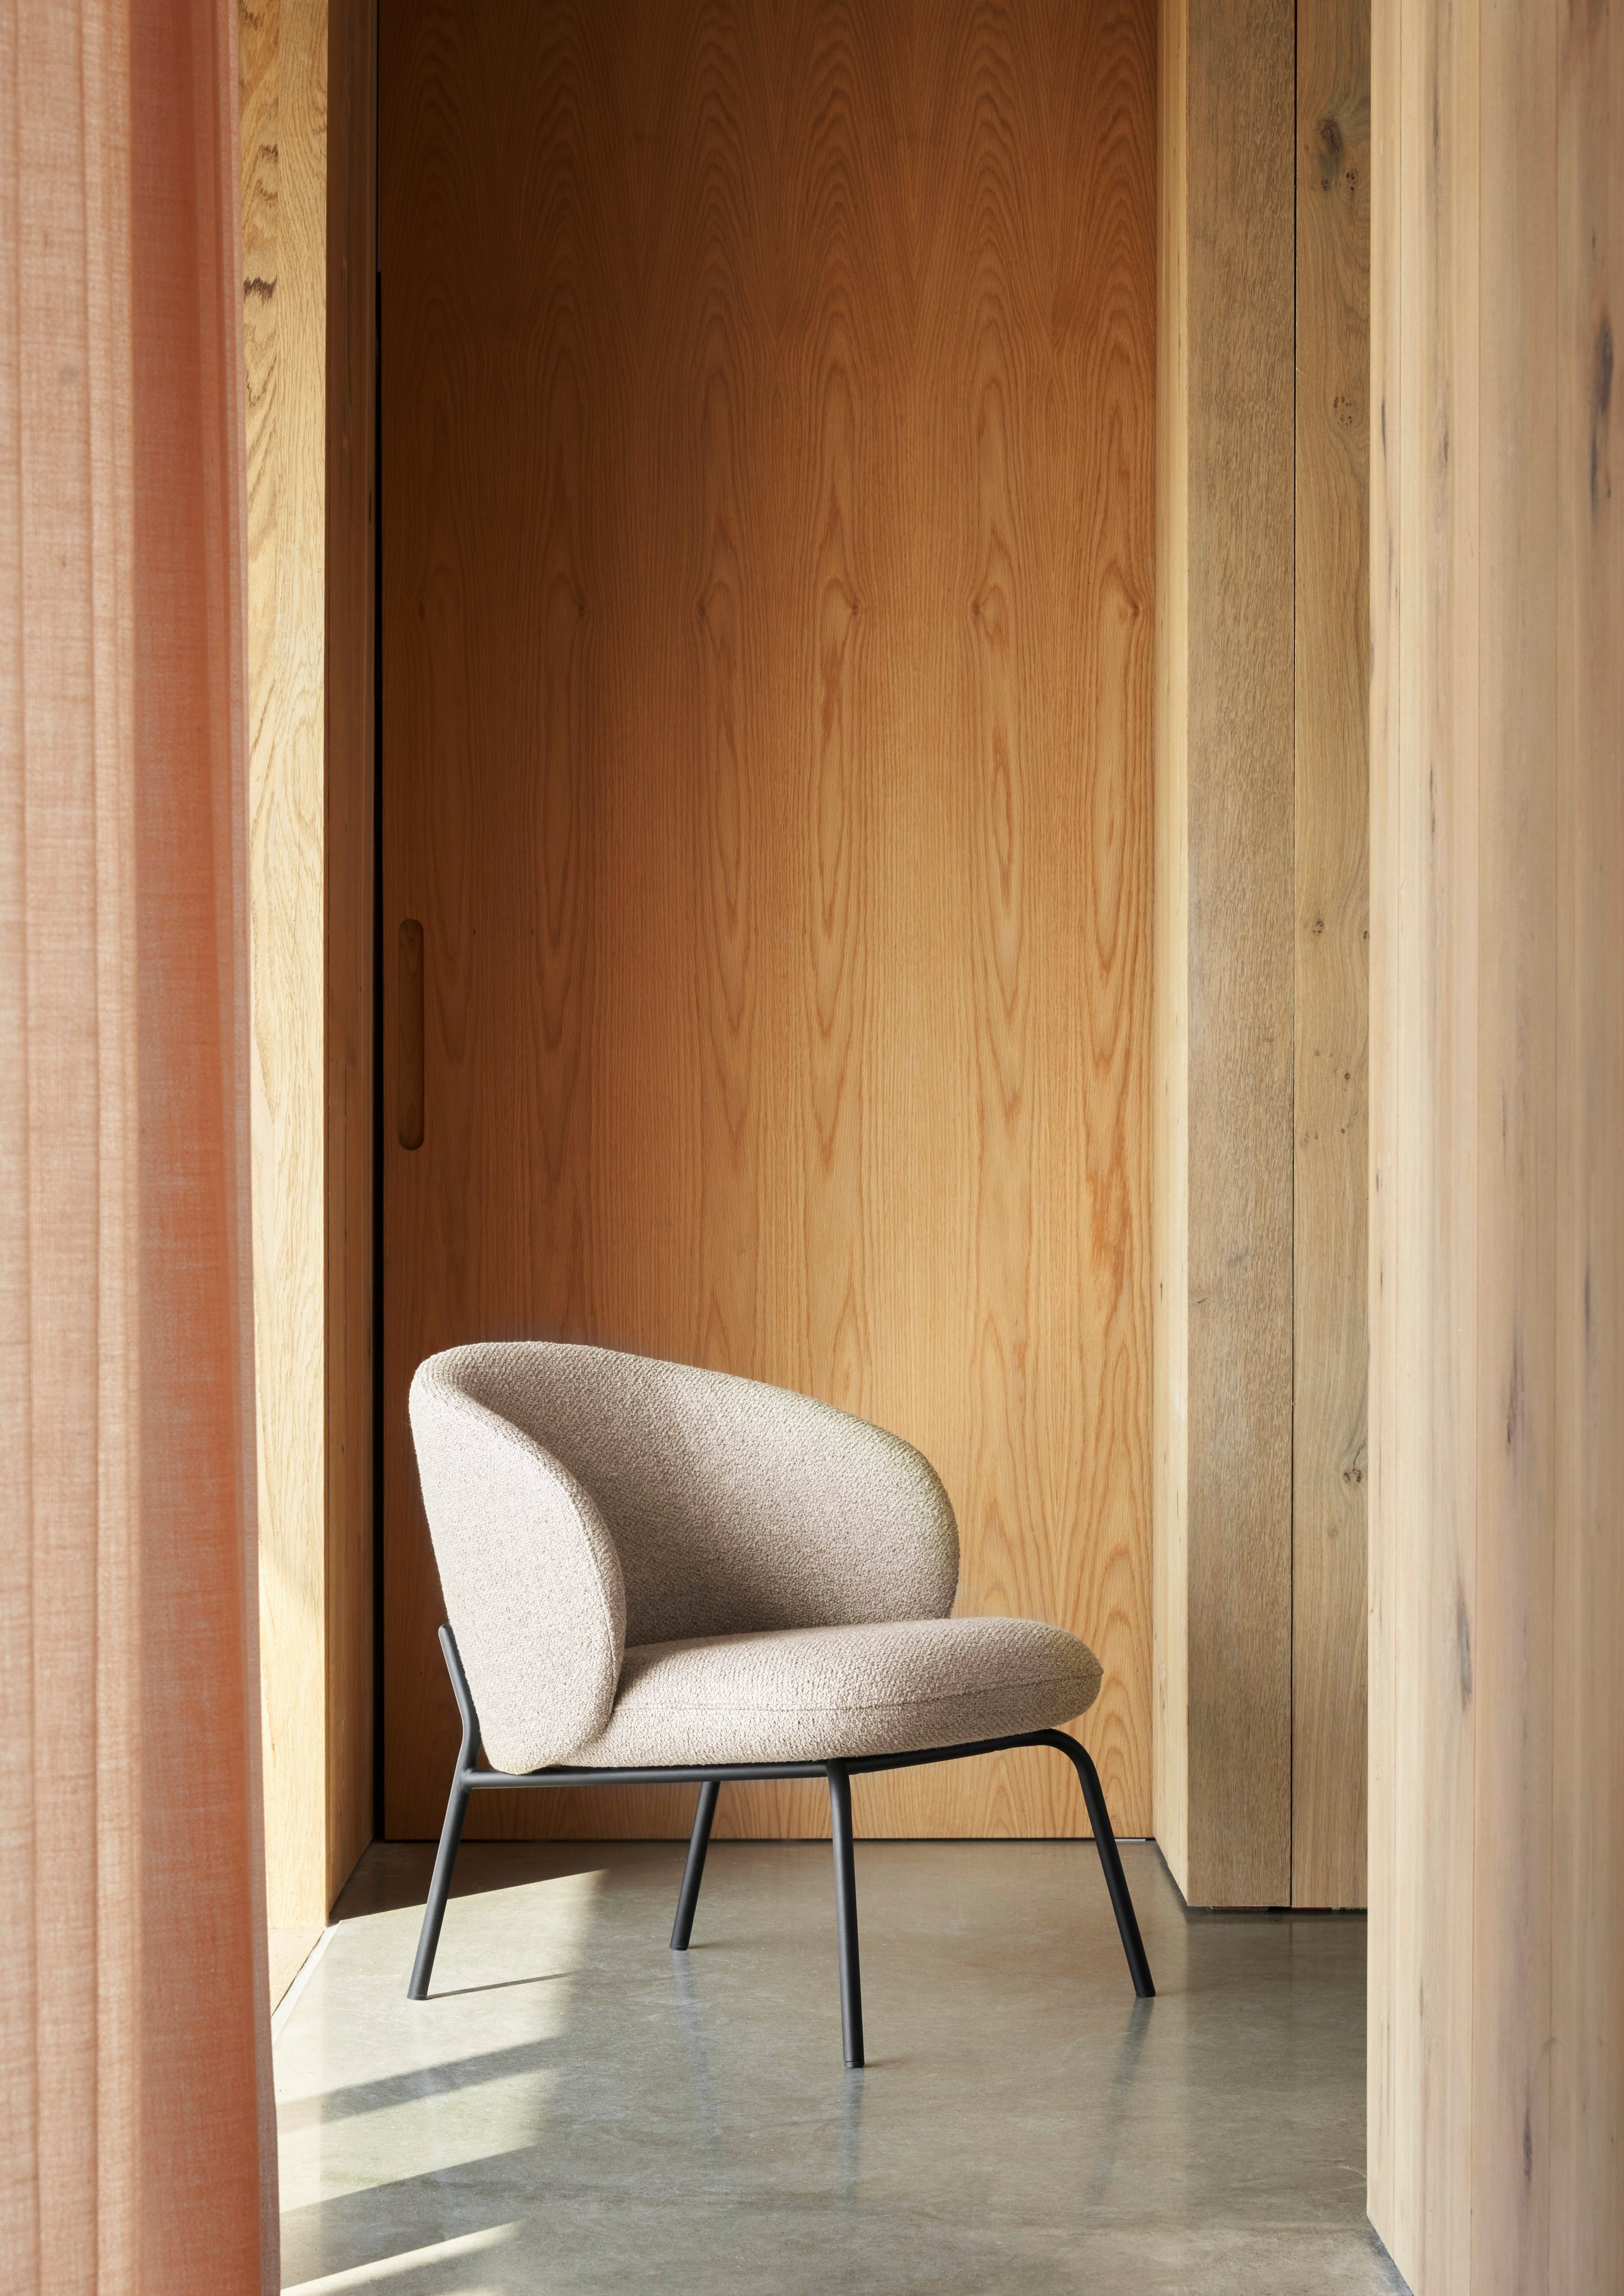 Modern chair with beige upholstery and black frame in a sunlit wooden interior